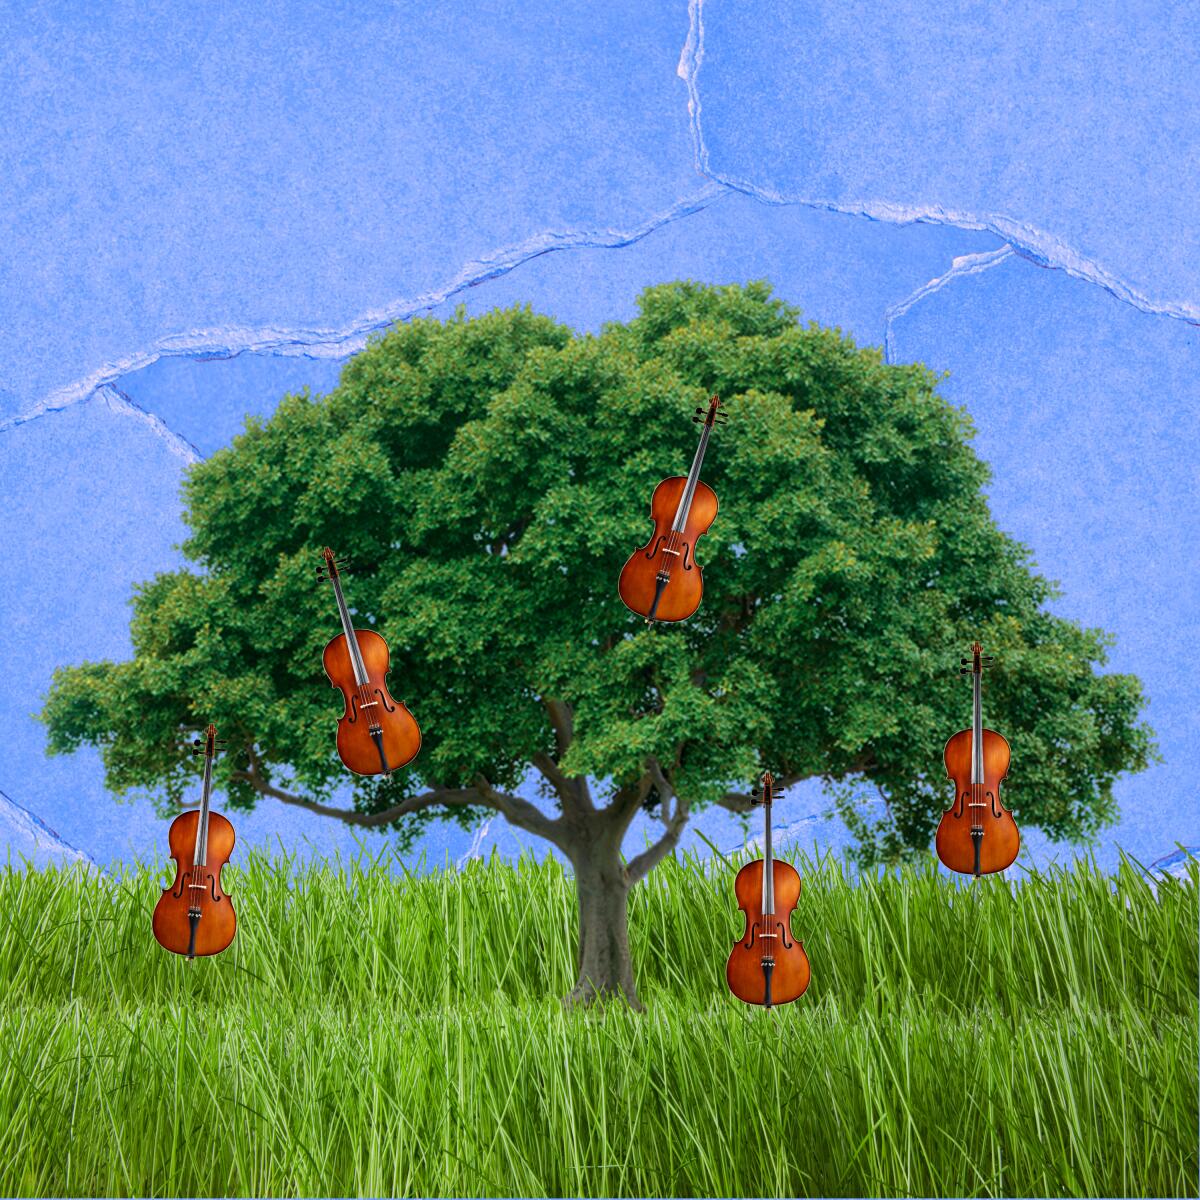 An illustration of violins hanging from a tree.